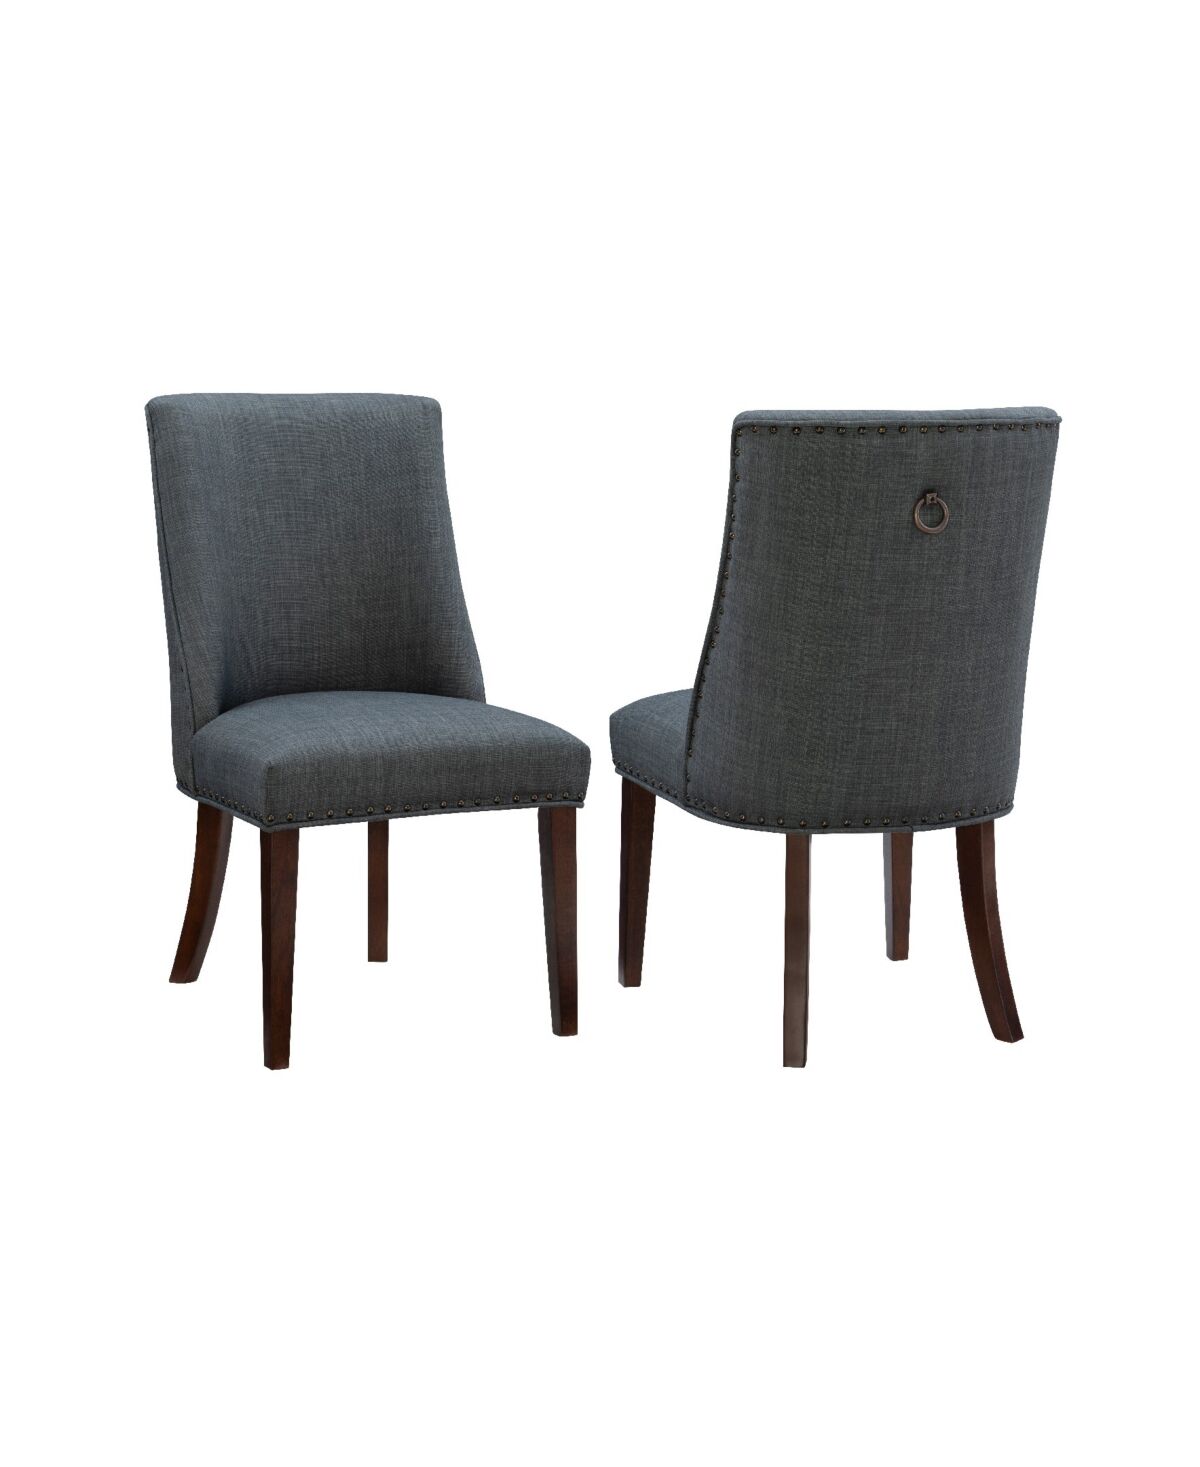 Linon Home Decor Powell Furniture Allard Upholstered Dining Chairs - Set of 2 - Espresso, Gray